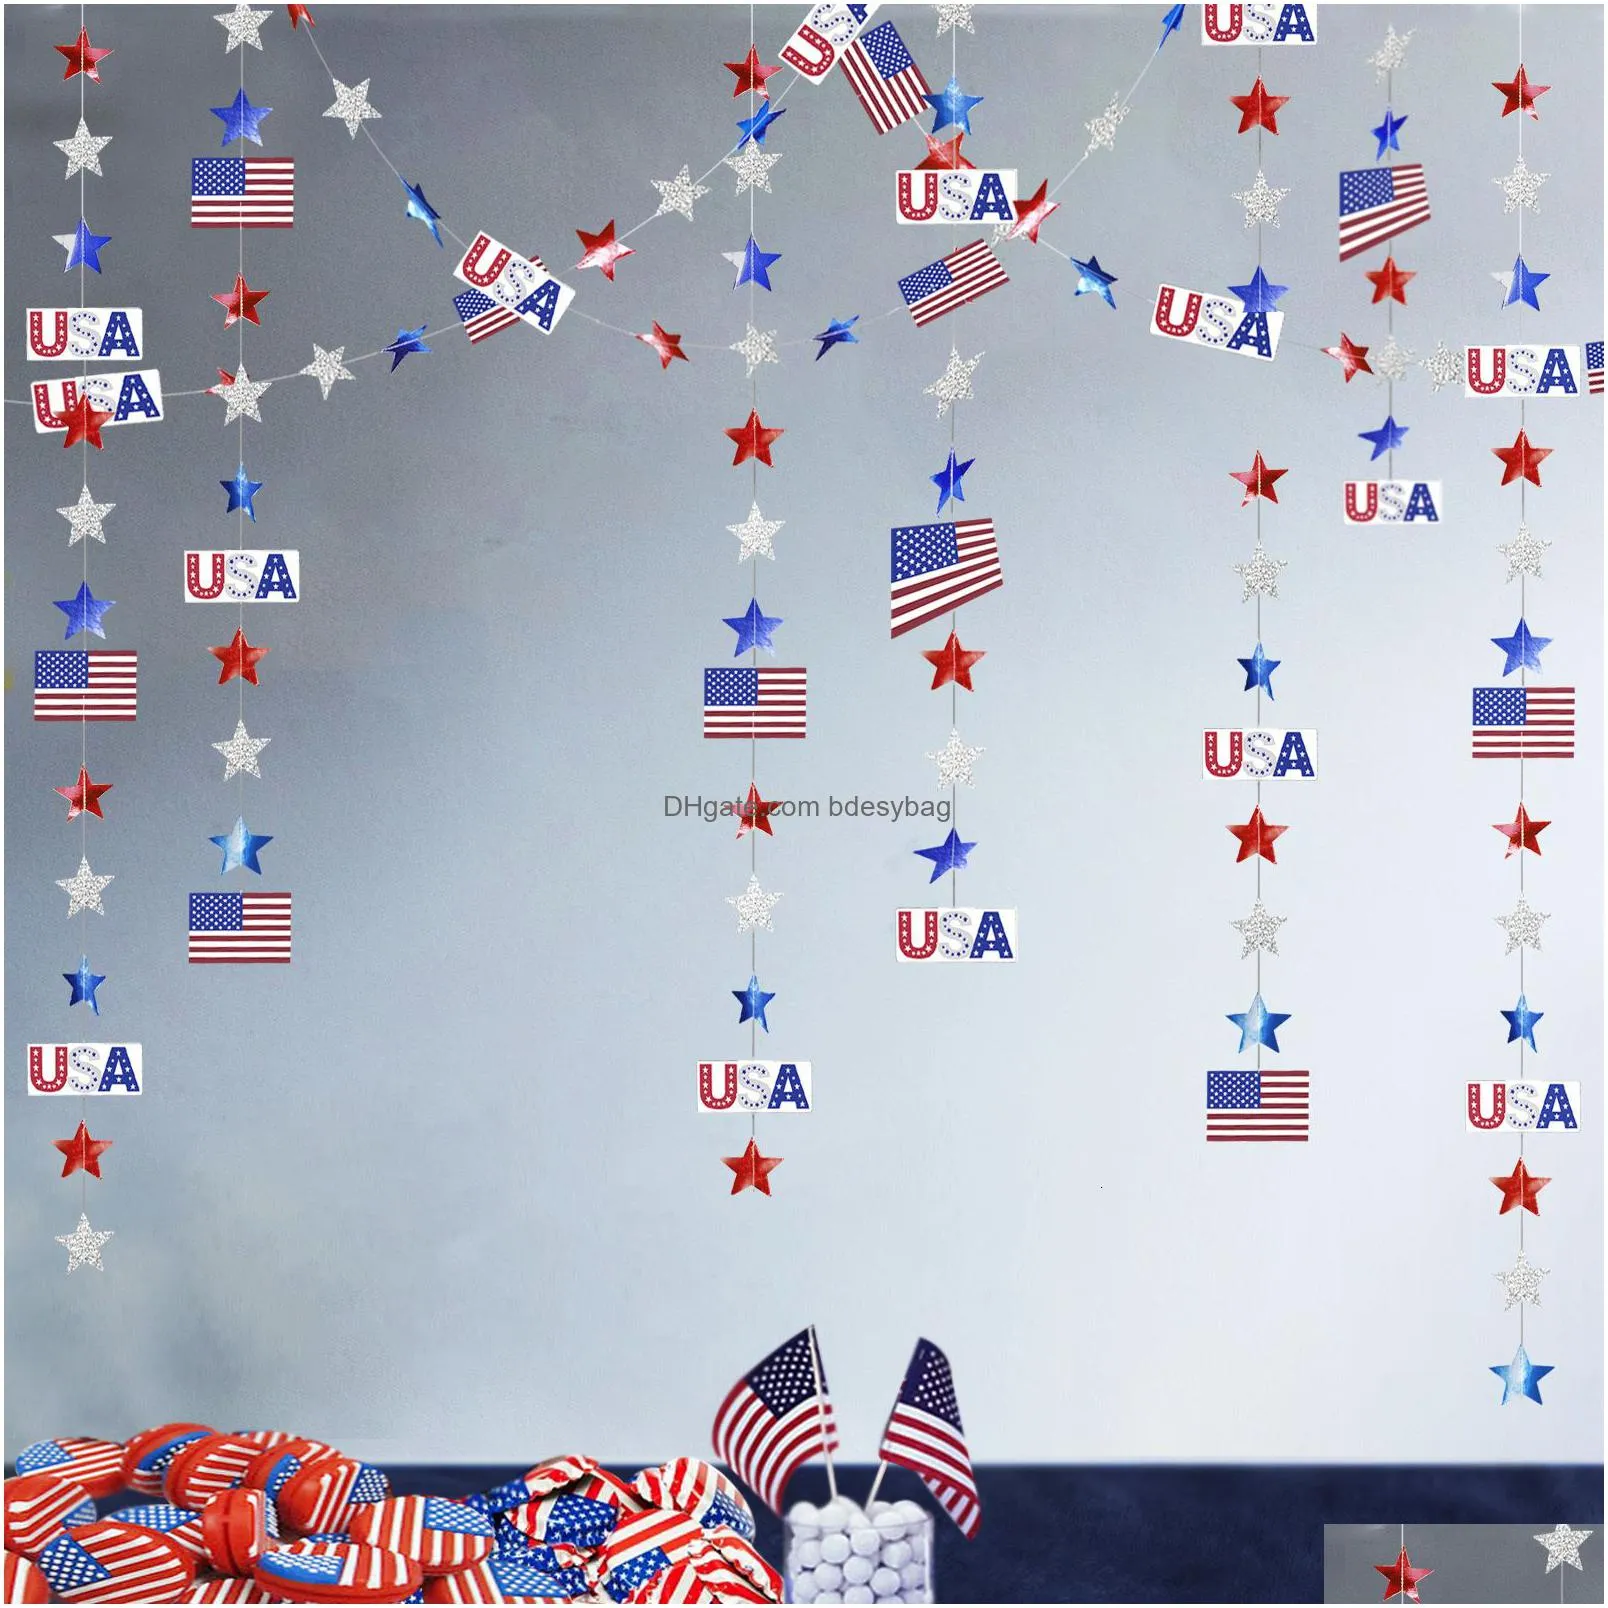 banner flags 4th of july red white blue usa themed party paper star streamers patriotic glitter garland string chain hanging decorations